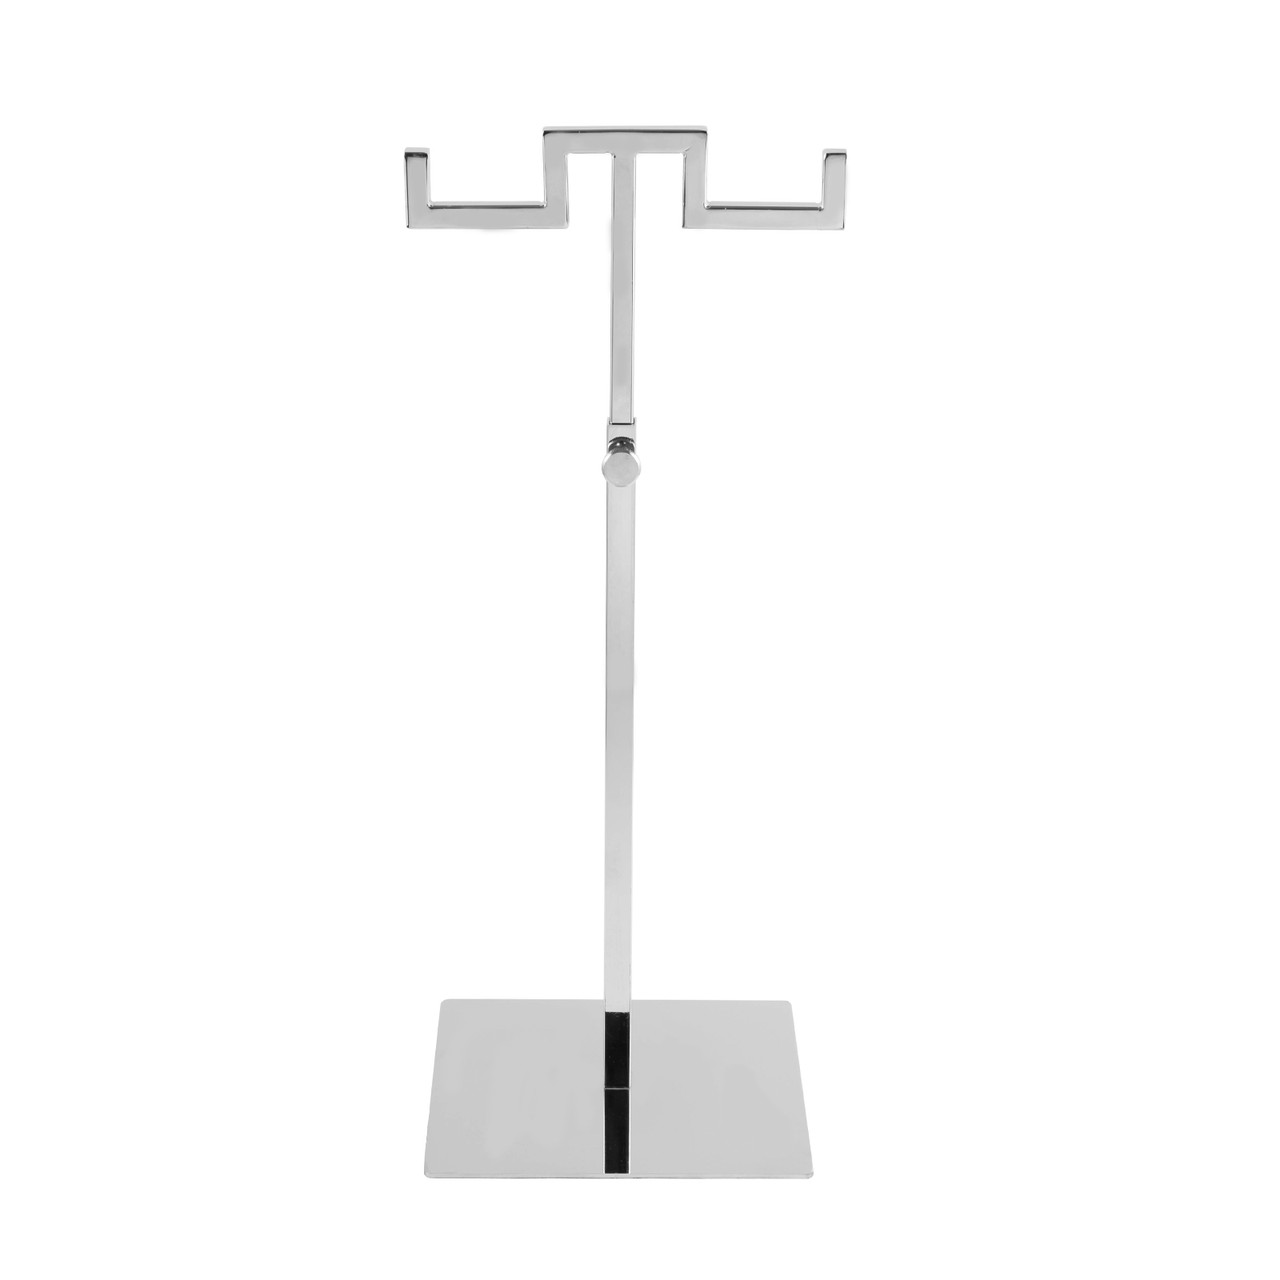 Polmart Countertop Jewelry/Scarf/Handbag T-Bar Display Stand with  Adjustable Height - Silver (12 - Pack) 